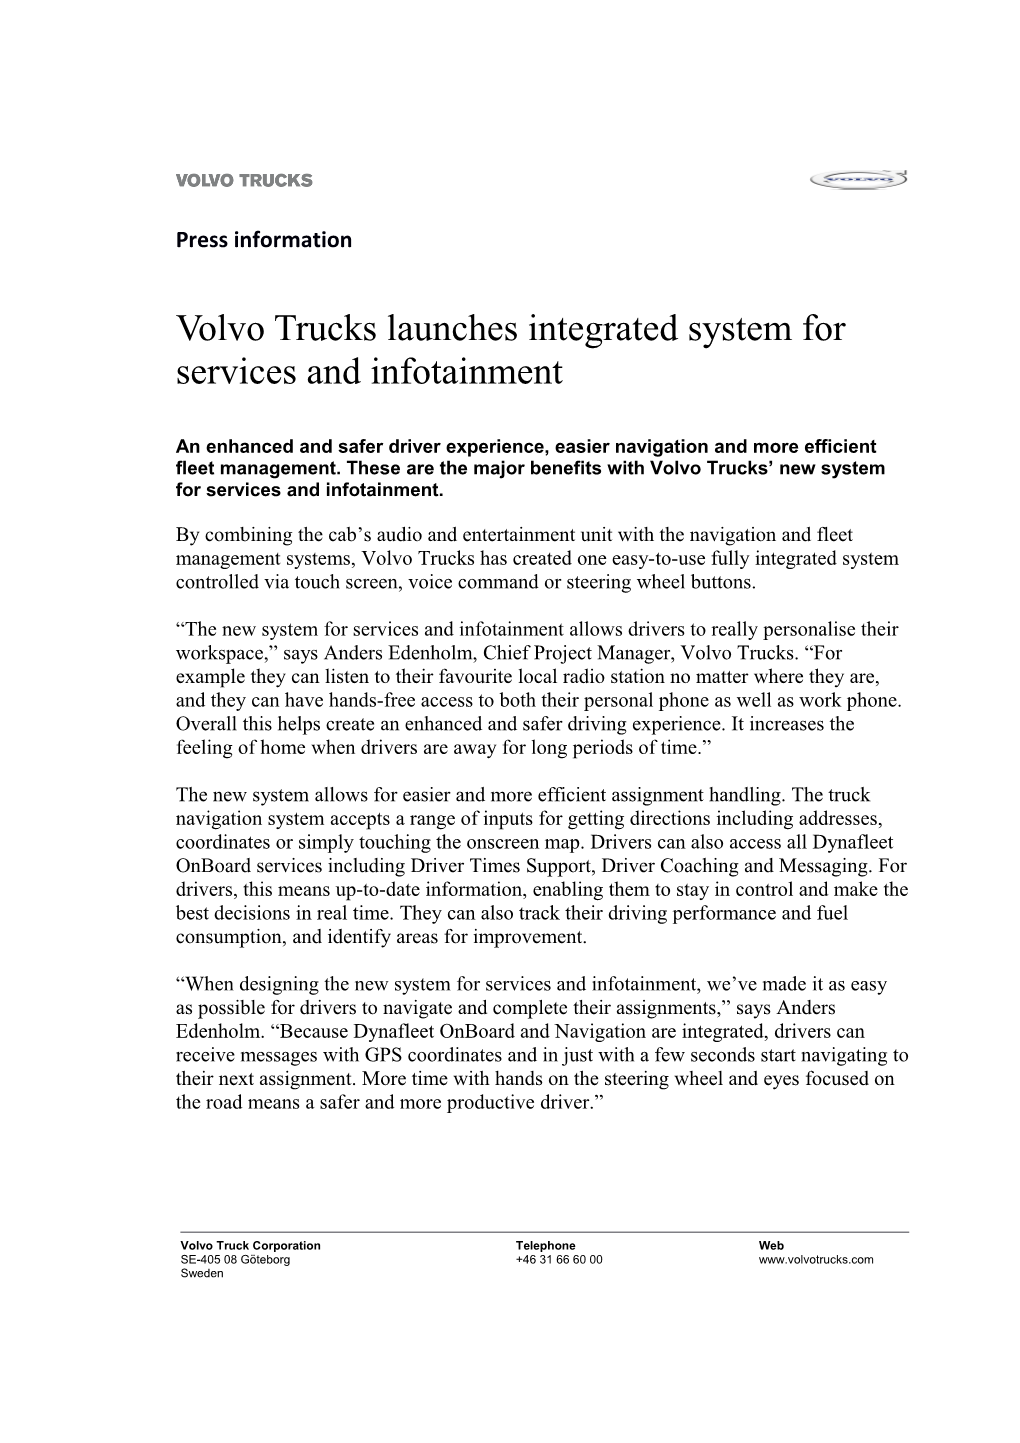 Volvo Trucks Launches Integrated System for Services and Infotainment